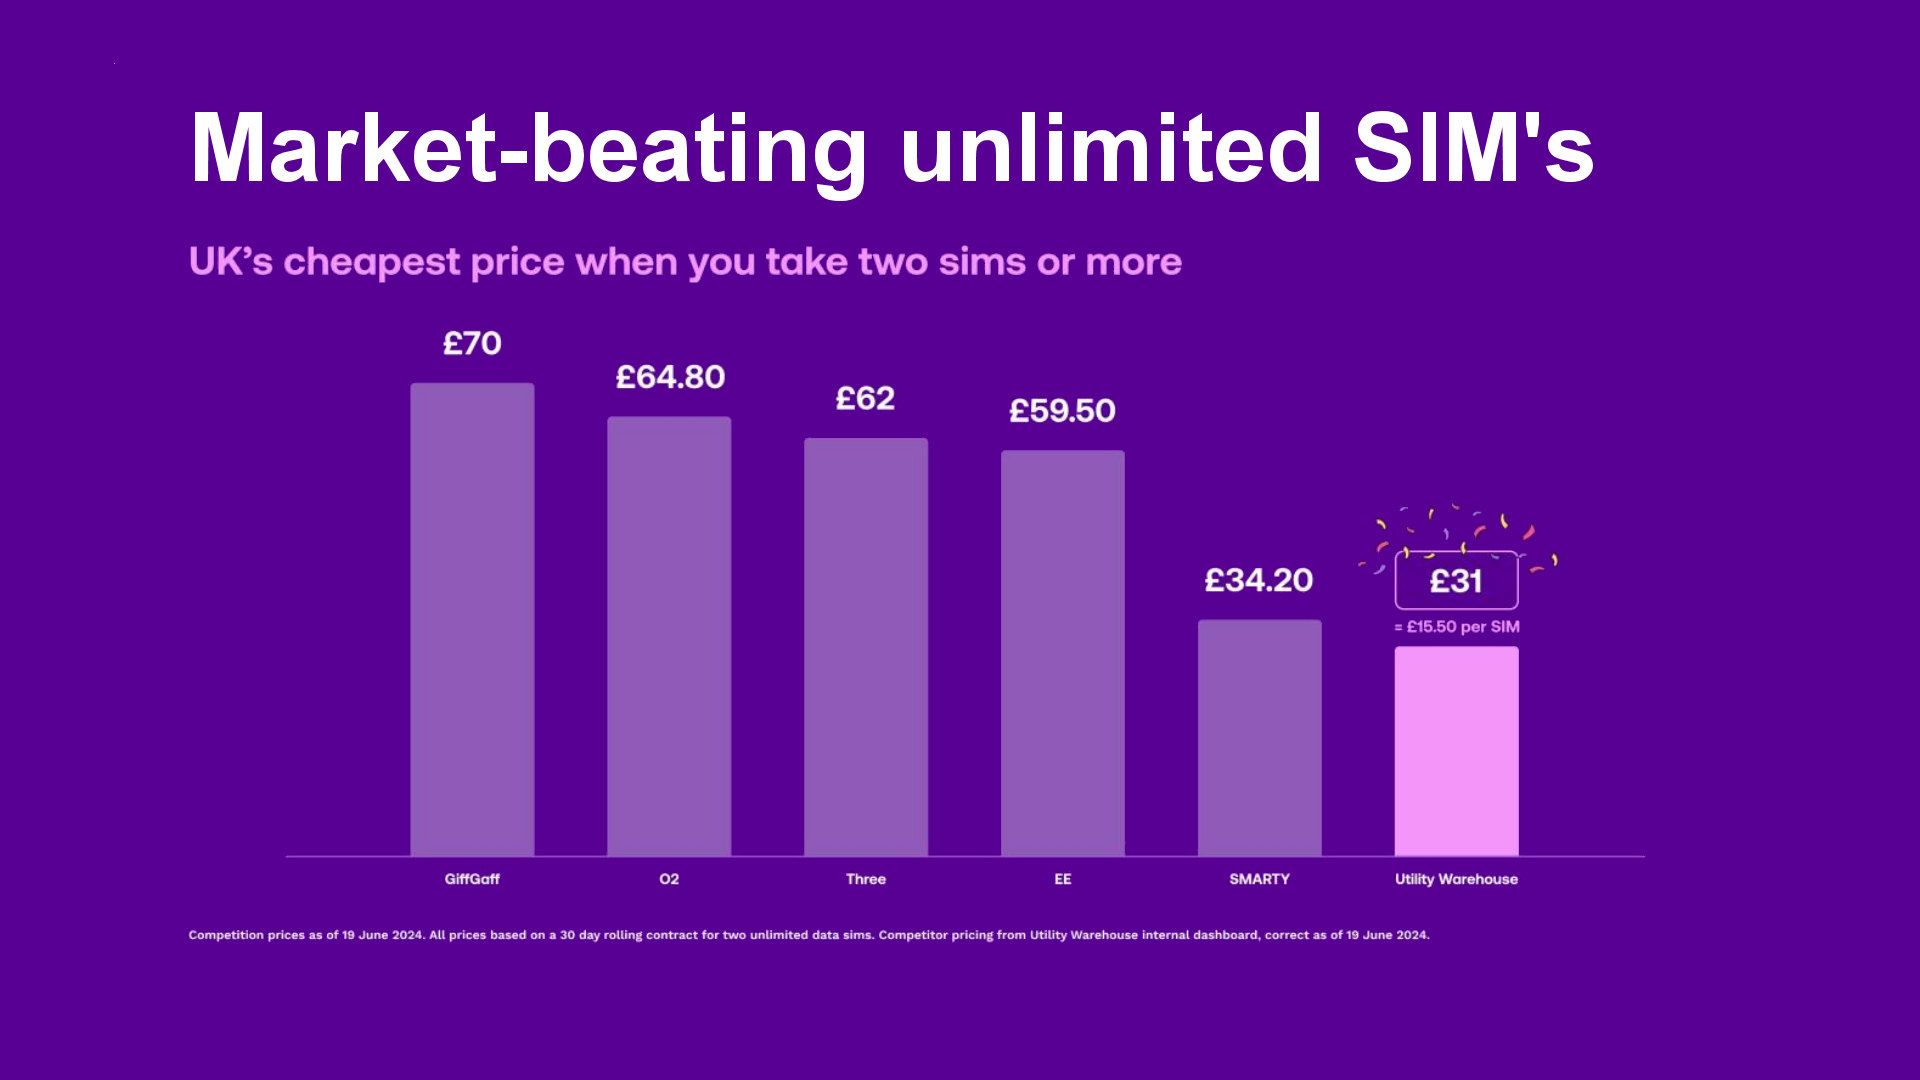 UW Mobile offers the UK's best unlimited data SIM deal with no contracts